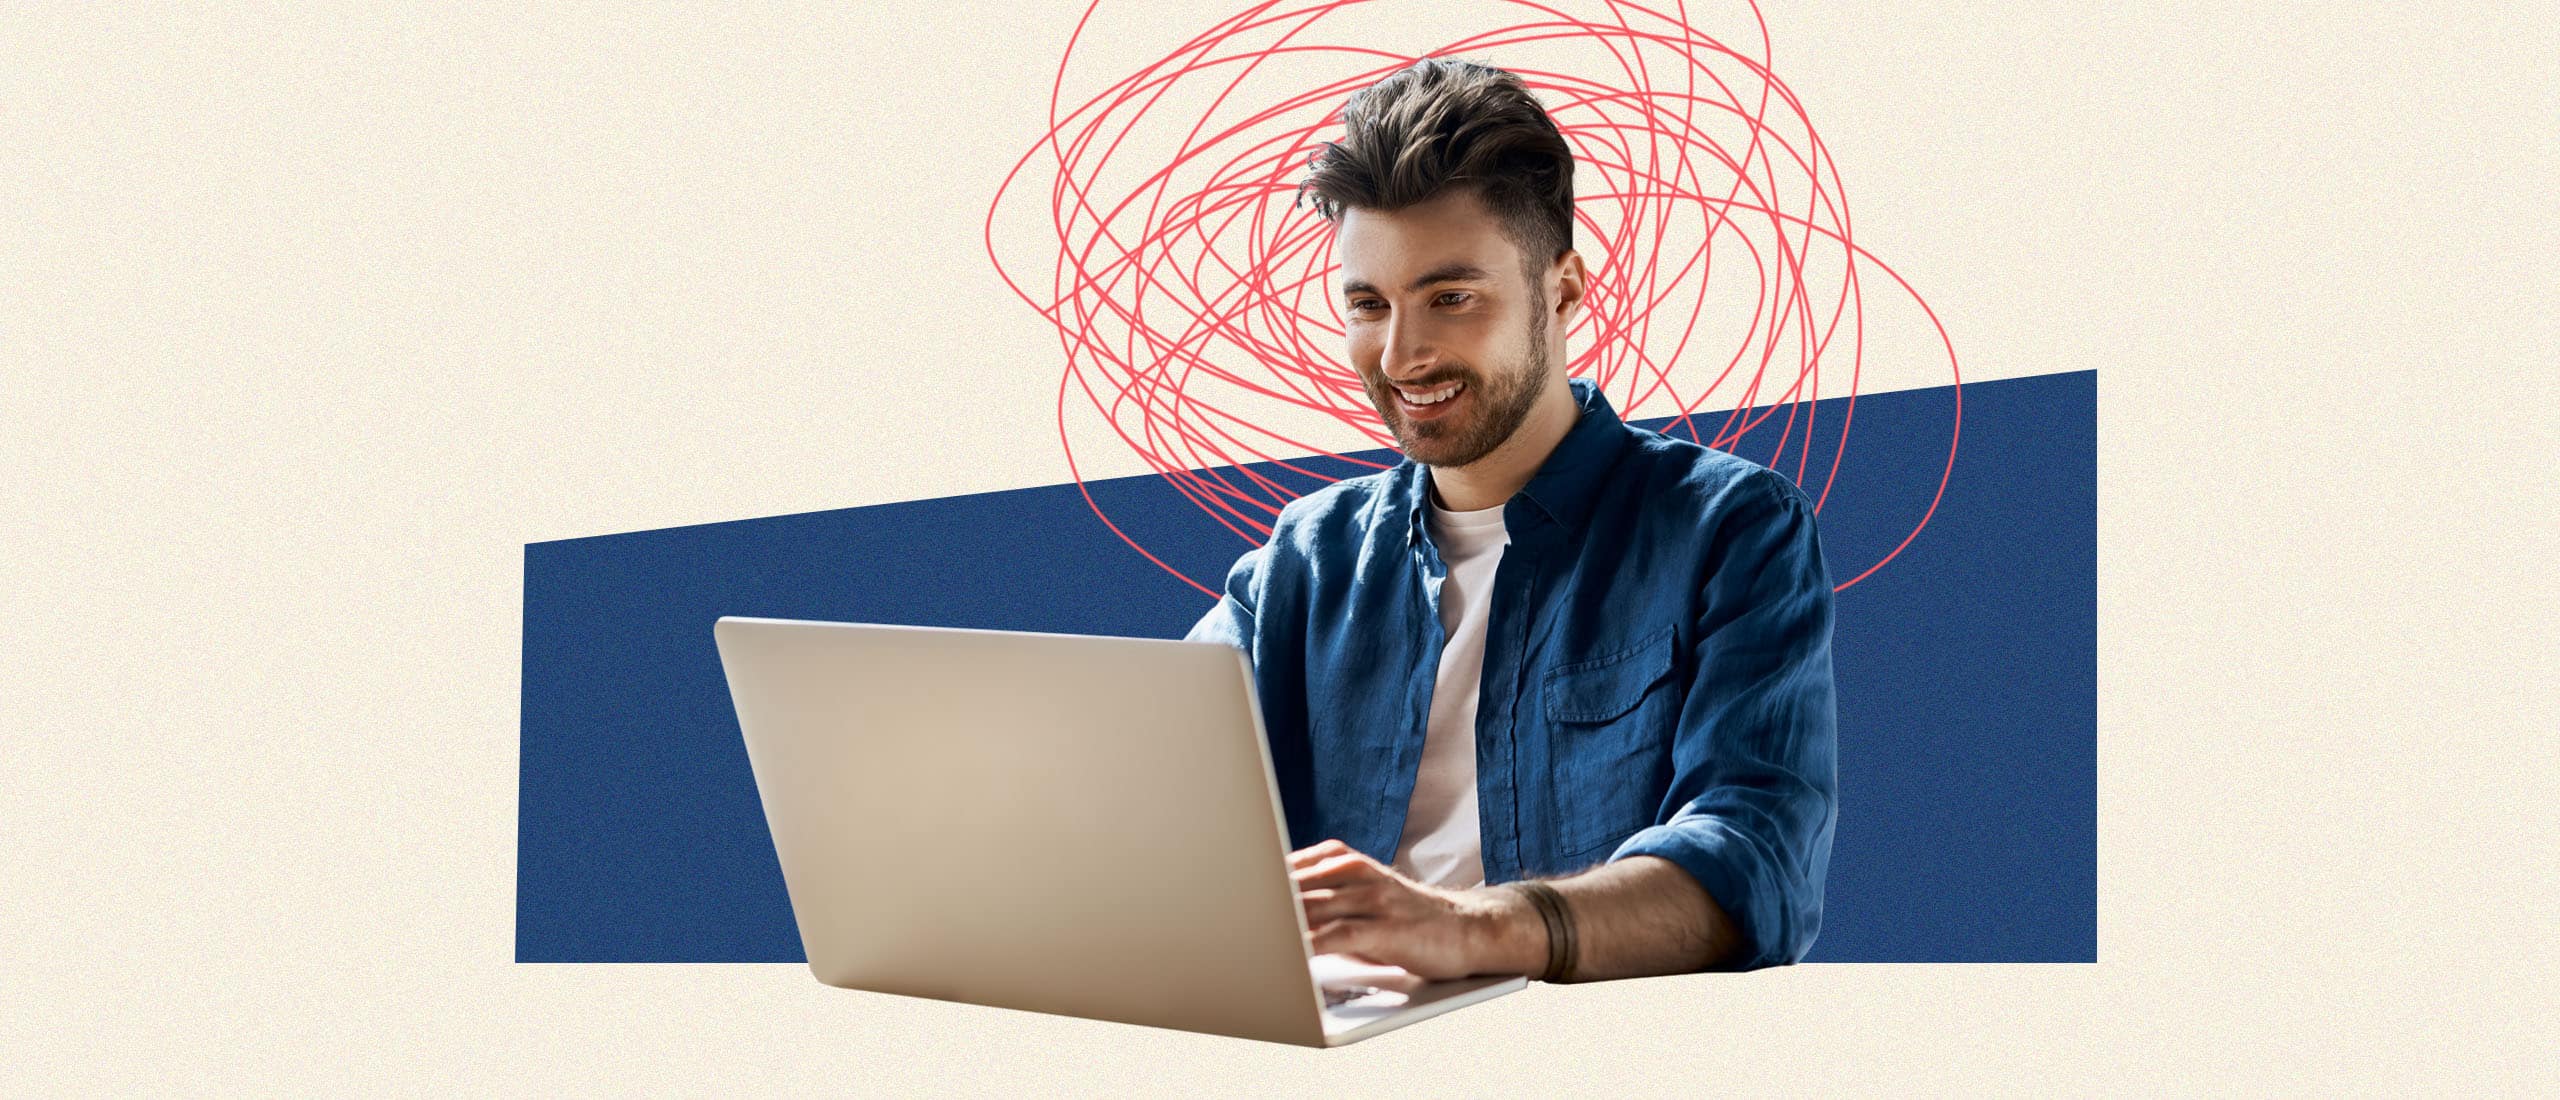 Man smiling at computer with red scribble behind head